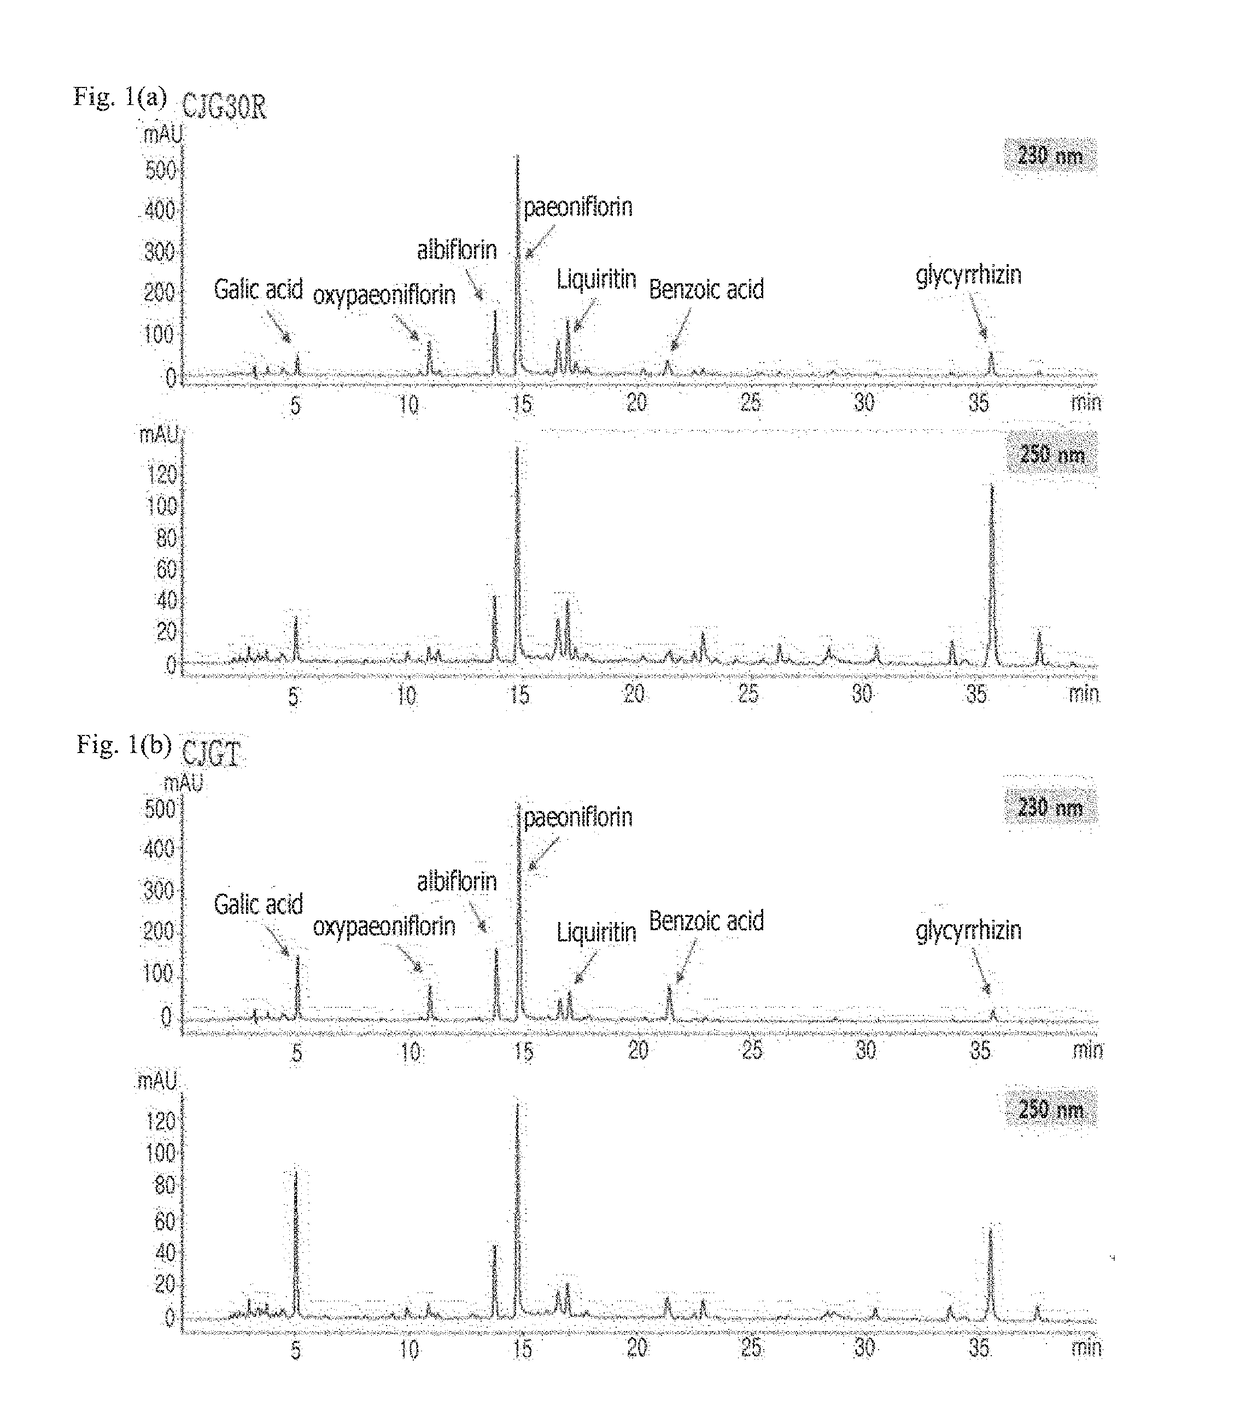 Pharmaceutical composition for preventing or treating angioedema, containing extract of peony root or mixture of peony root and licorice as active ingredient